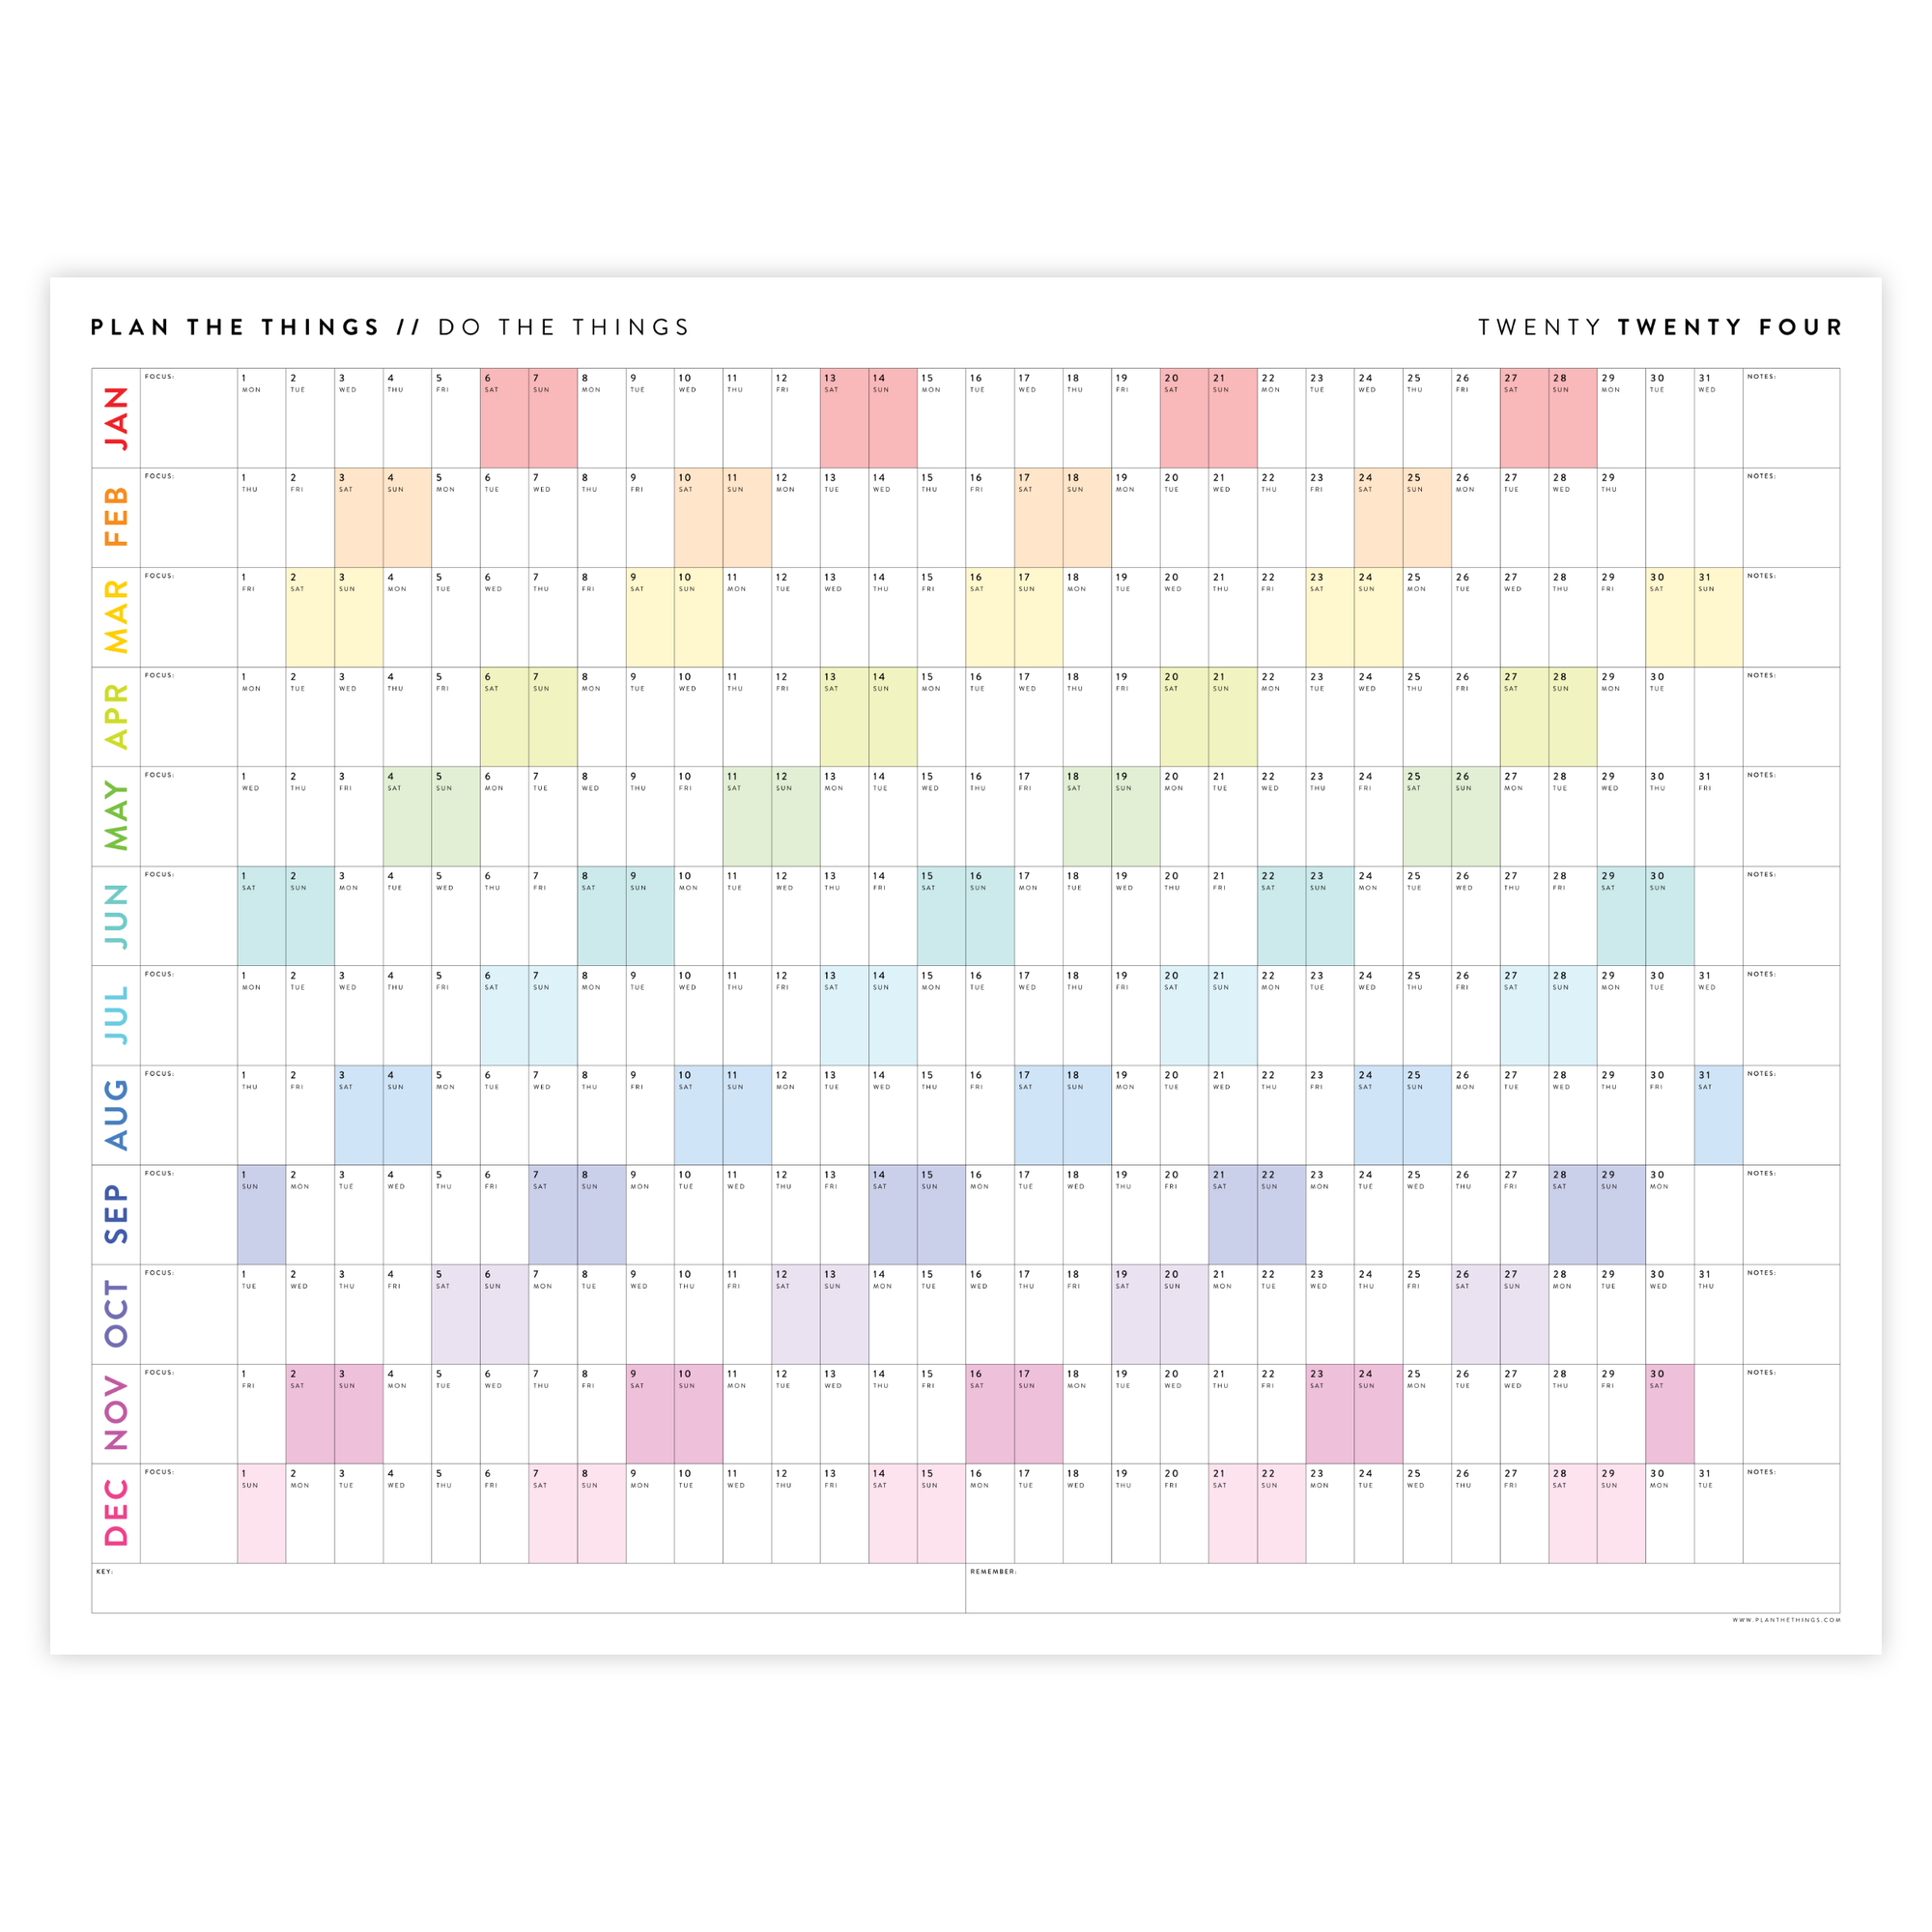 PRINTABLE HORIZONTAL 2024 WALL CALENDAR WITH RAINBOW WEEKENDS - INSTANT DOWNLOAD